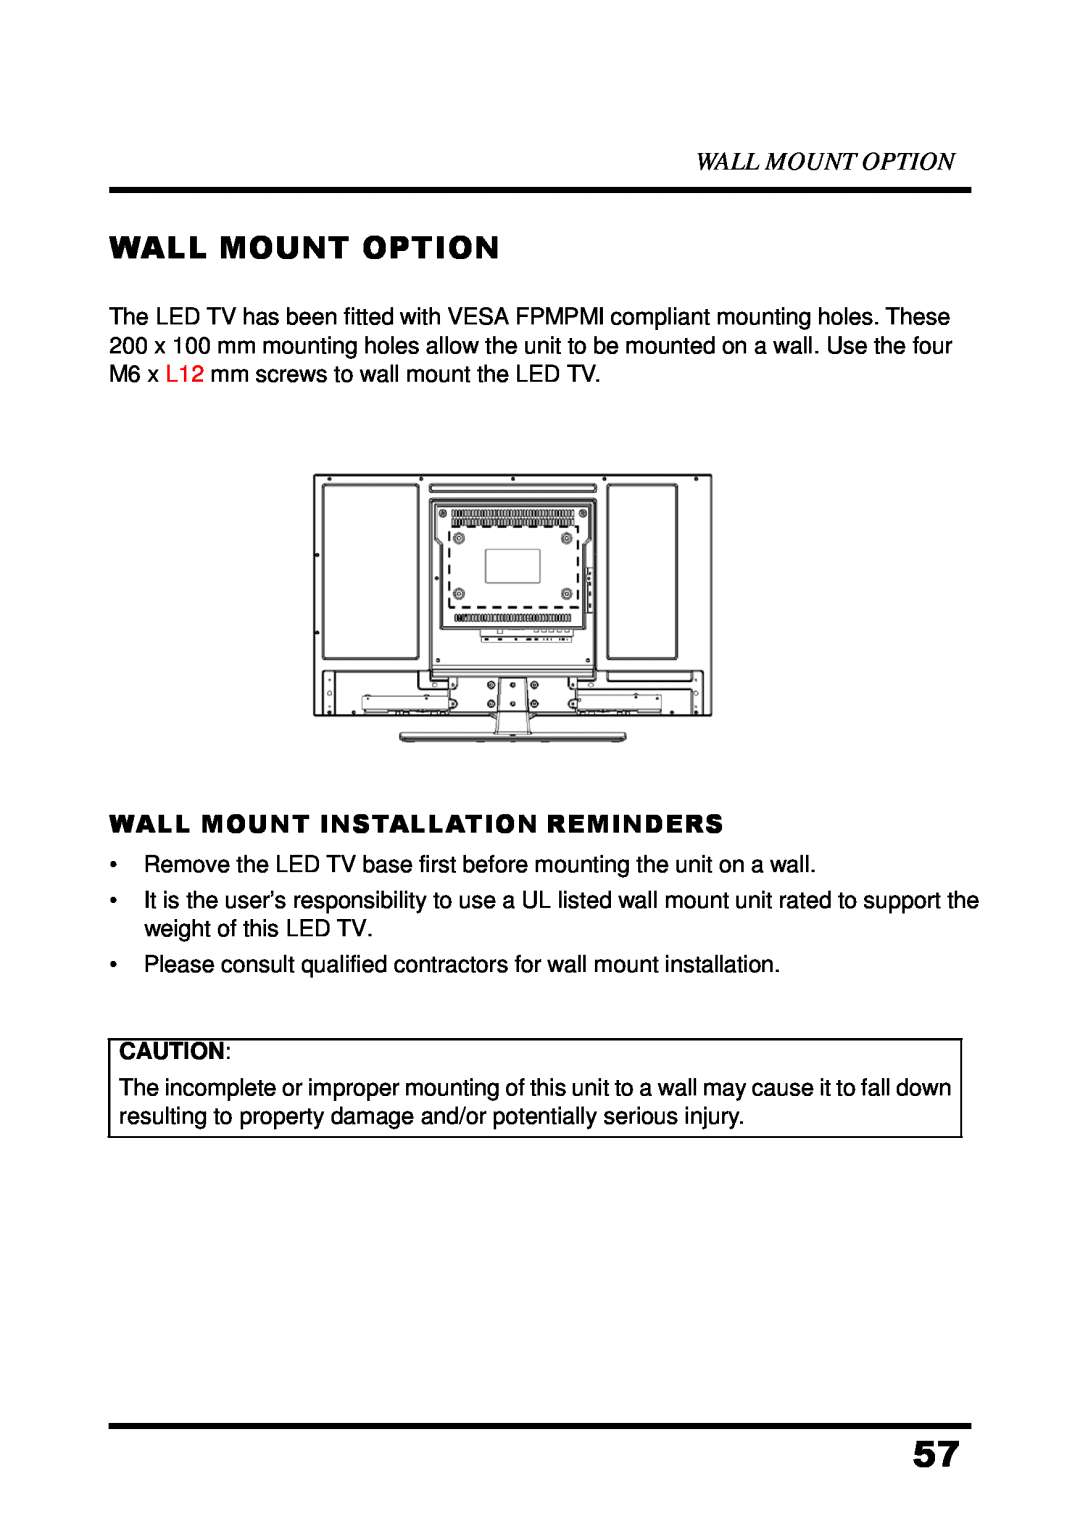 Westinghouse UW48T7HW manual Wall Mount Option, Wall Mount Installation Reminders 